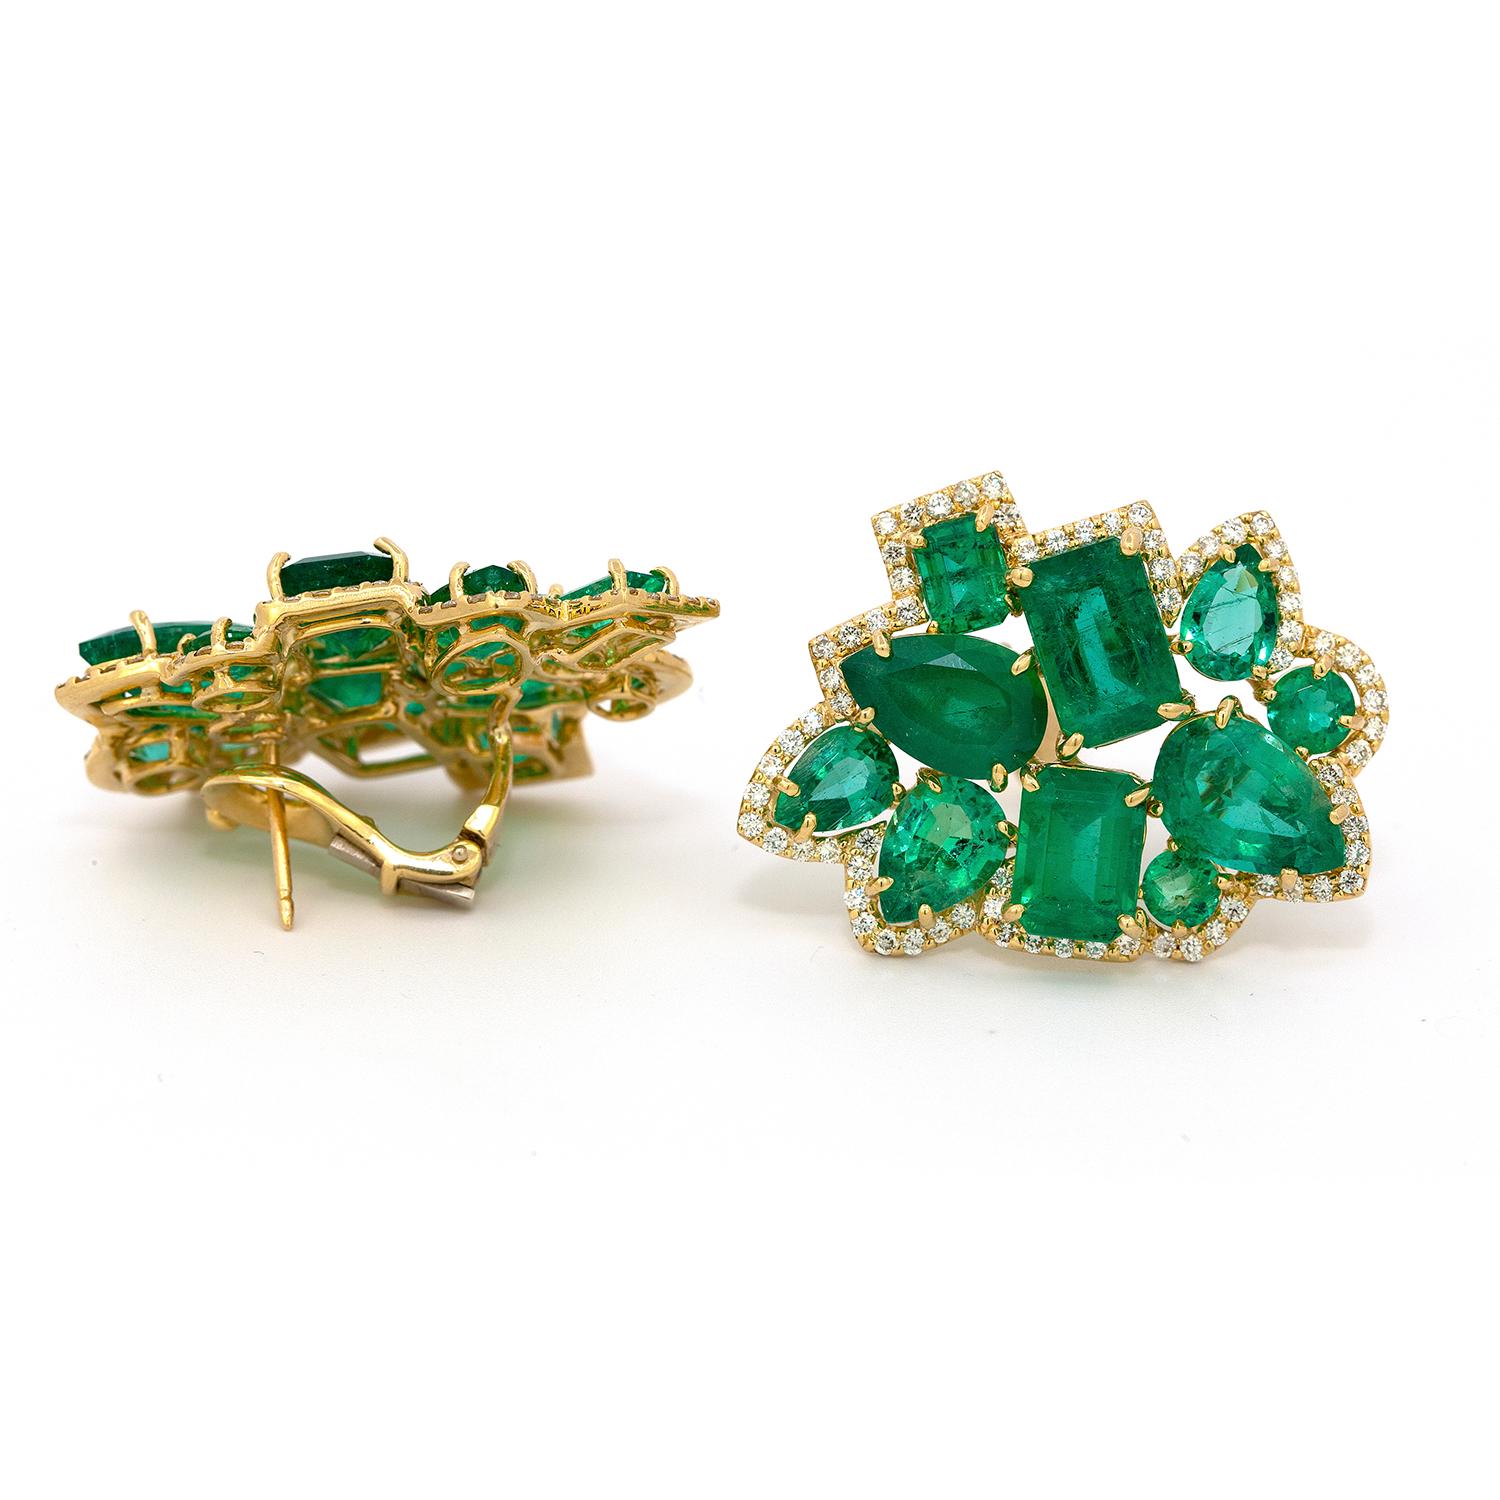 24.38 Carat of Emeralds and 1.92 Carat of Diamonds Modern Geometric Earrings In Good Condition For Sale In New York, NY